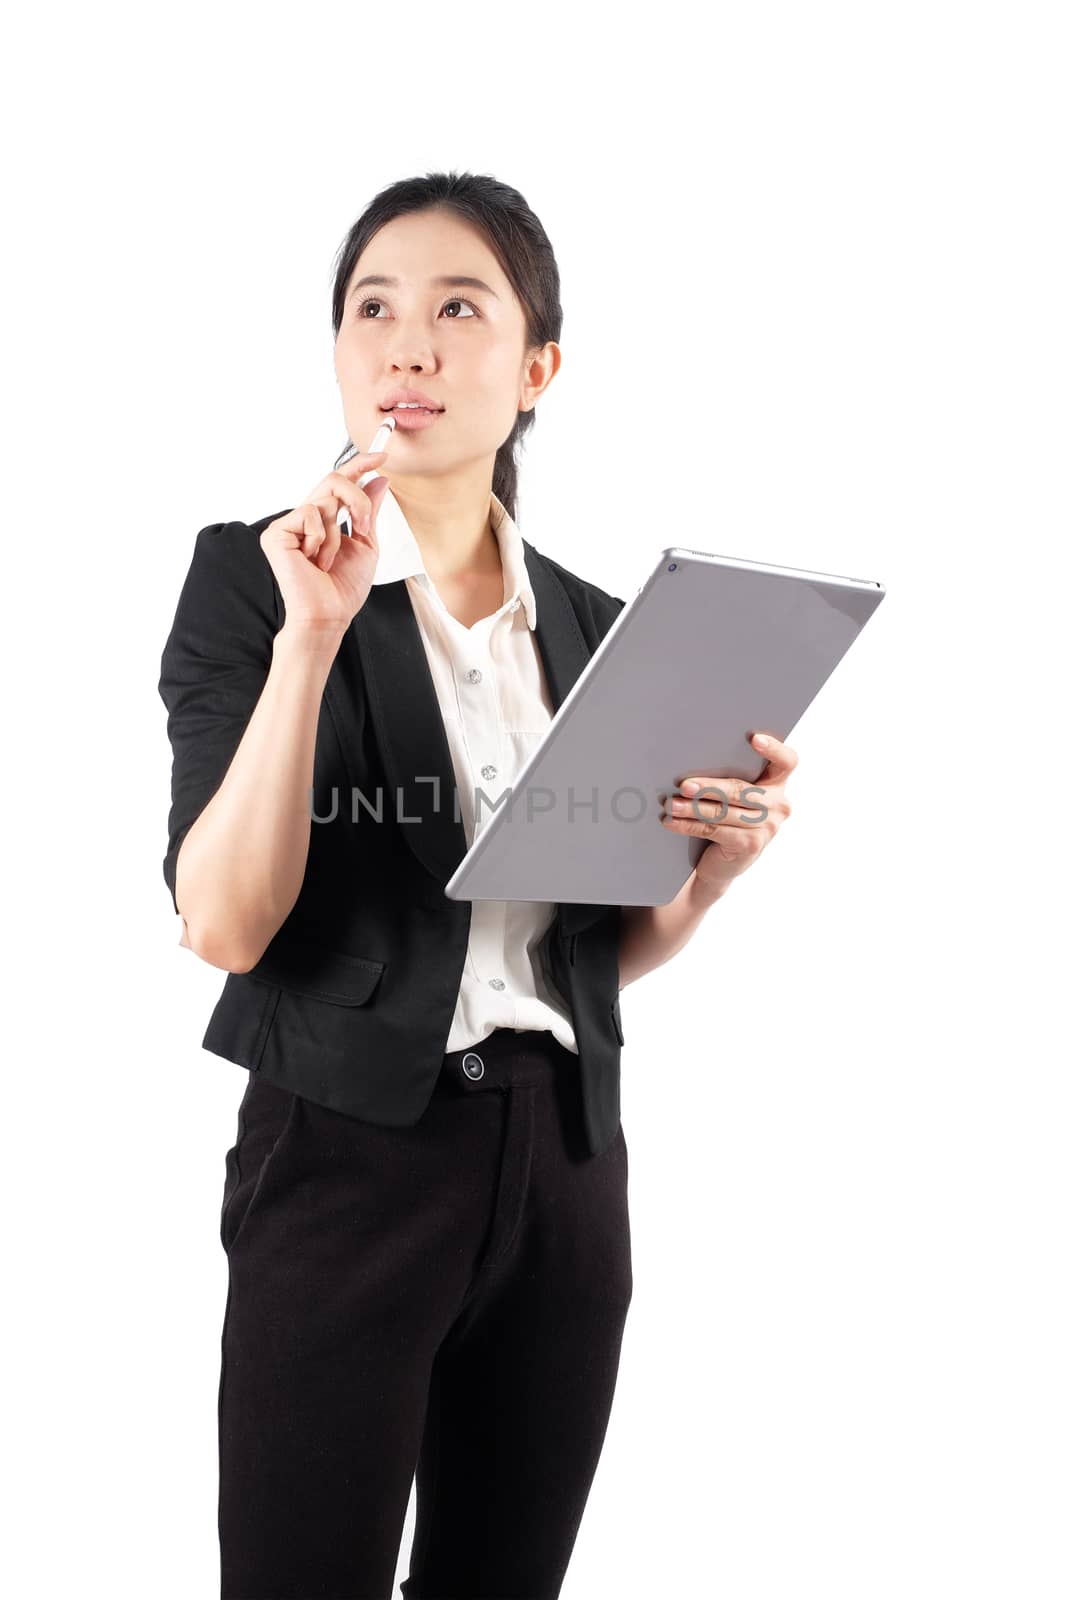 young working woman holding digital tablet on white background by Surasak